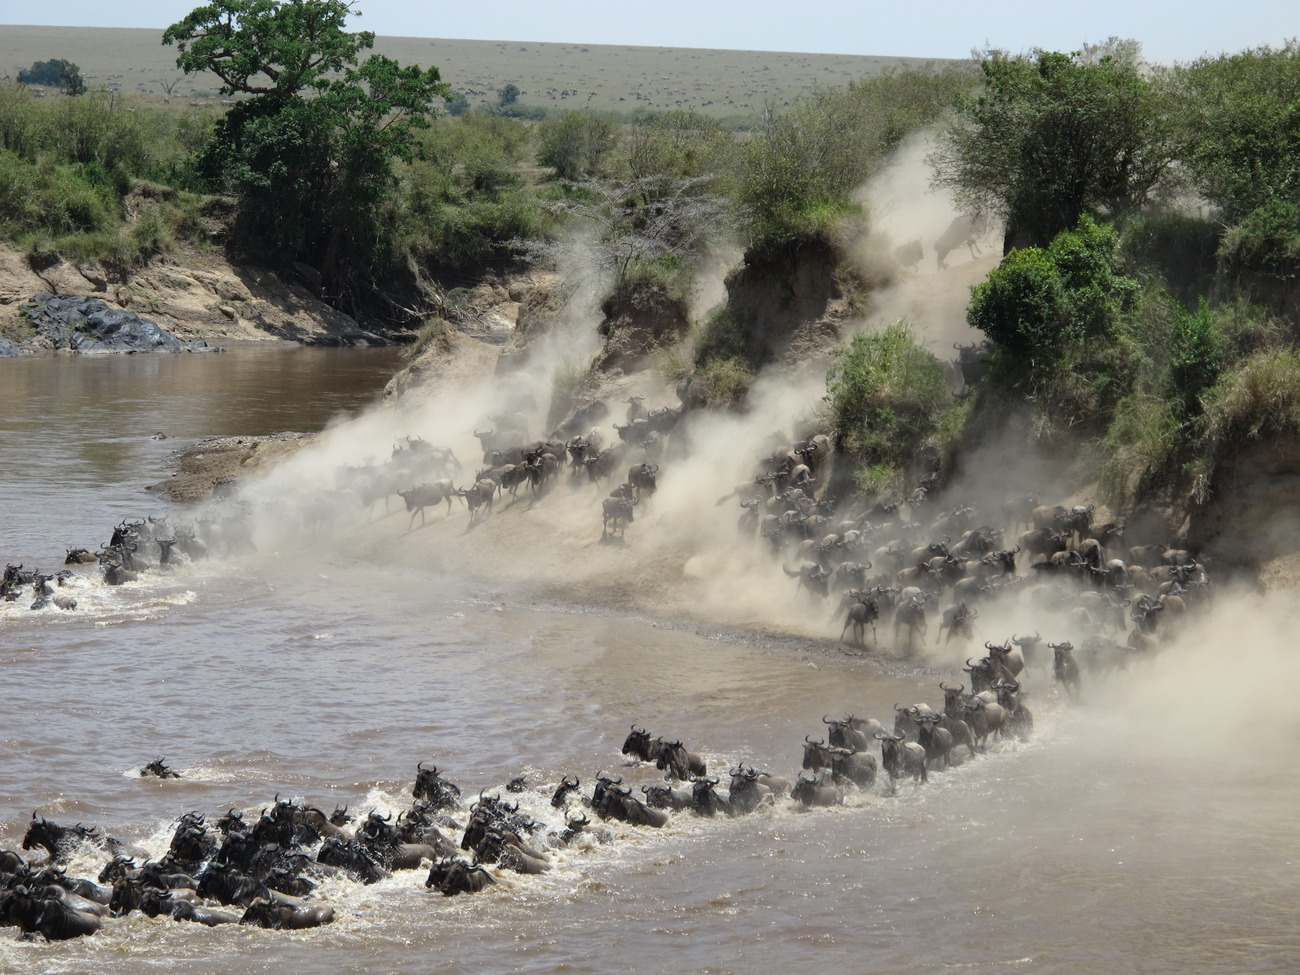 The great migration of the wildebeest on the route Kenya - Tanzania